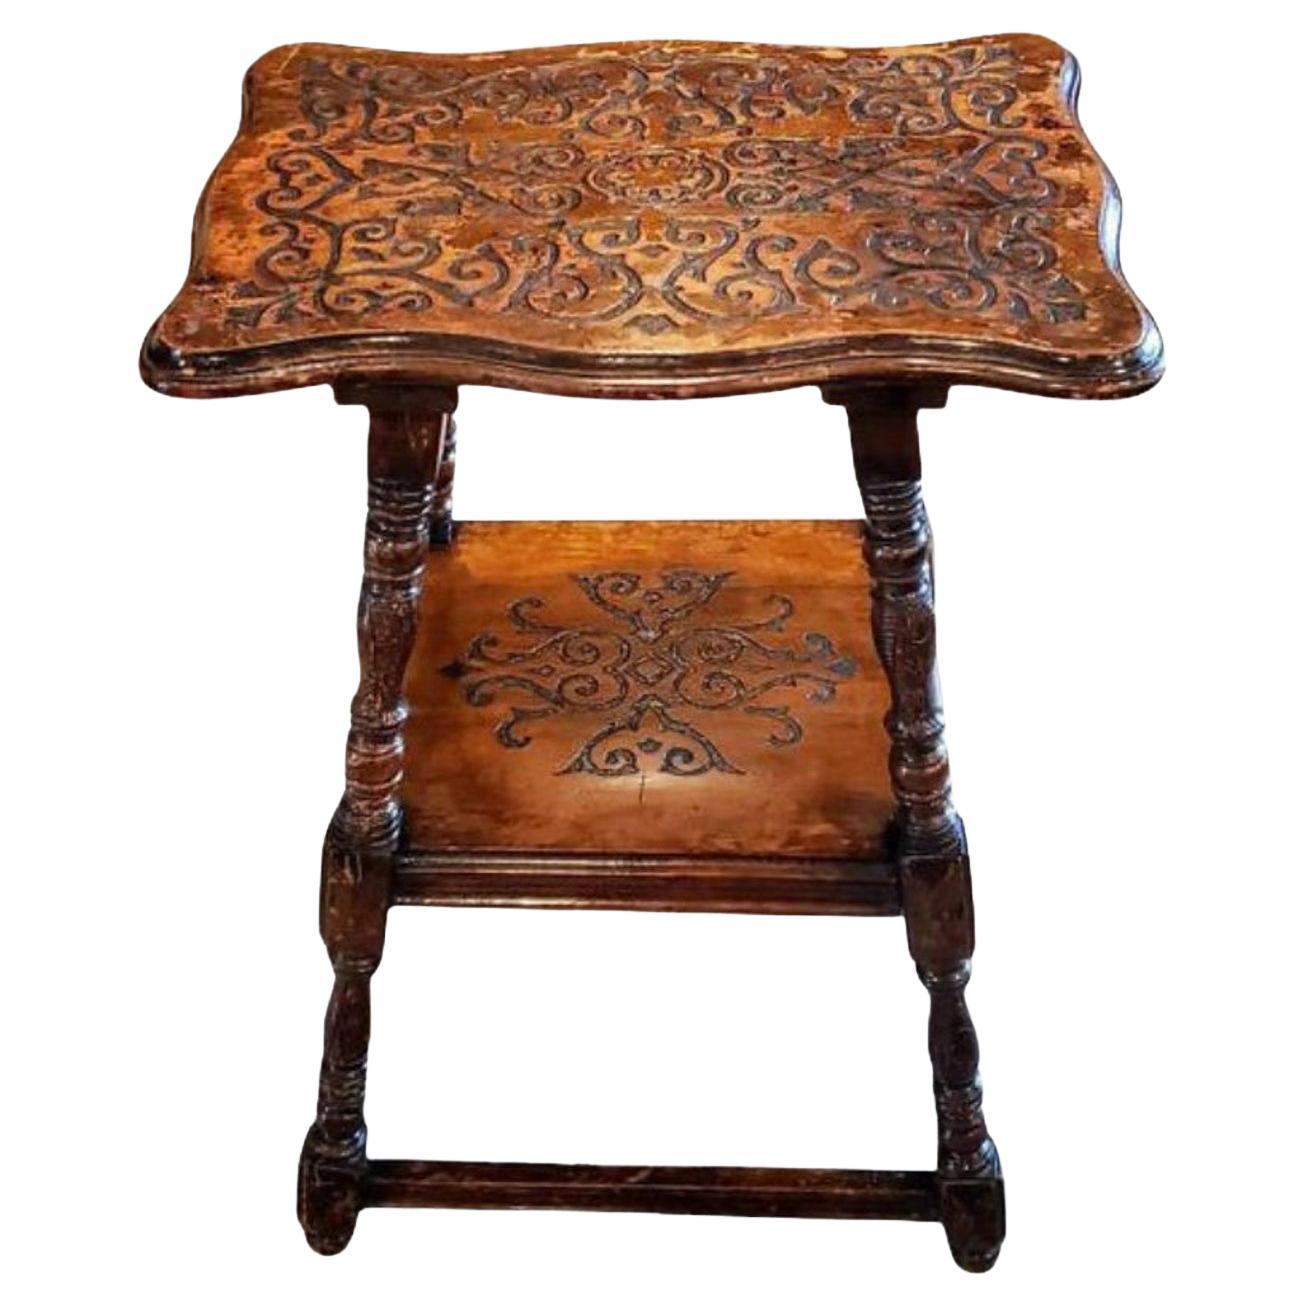 Antique Country English Tiered Joint Stool Table